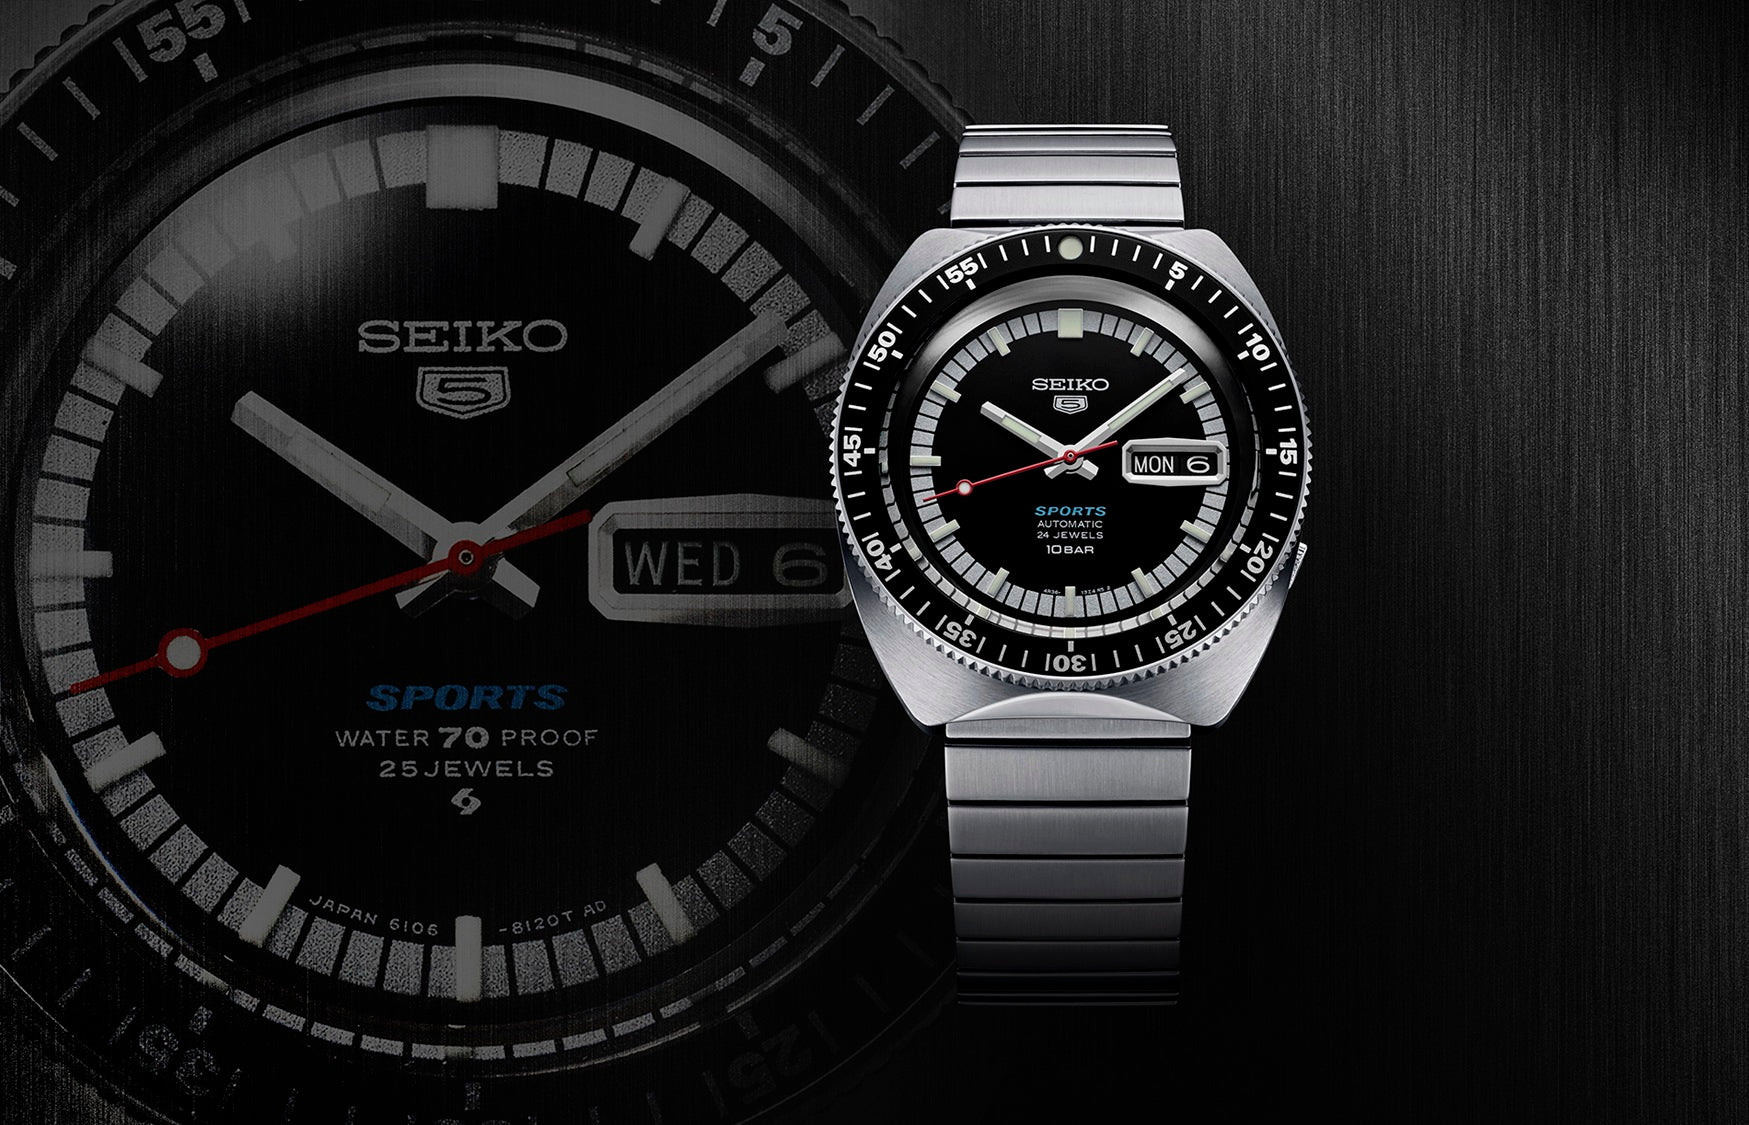 Seiko 5 Sports celebrates 55 years with four new creations paying homage to its origins.